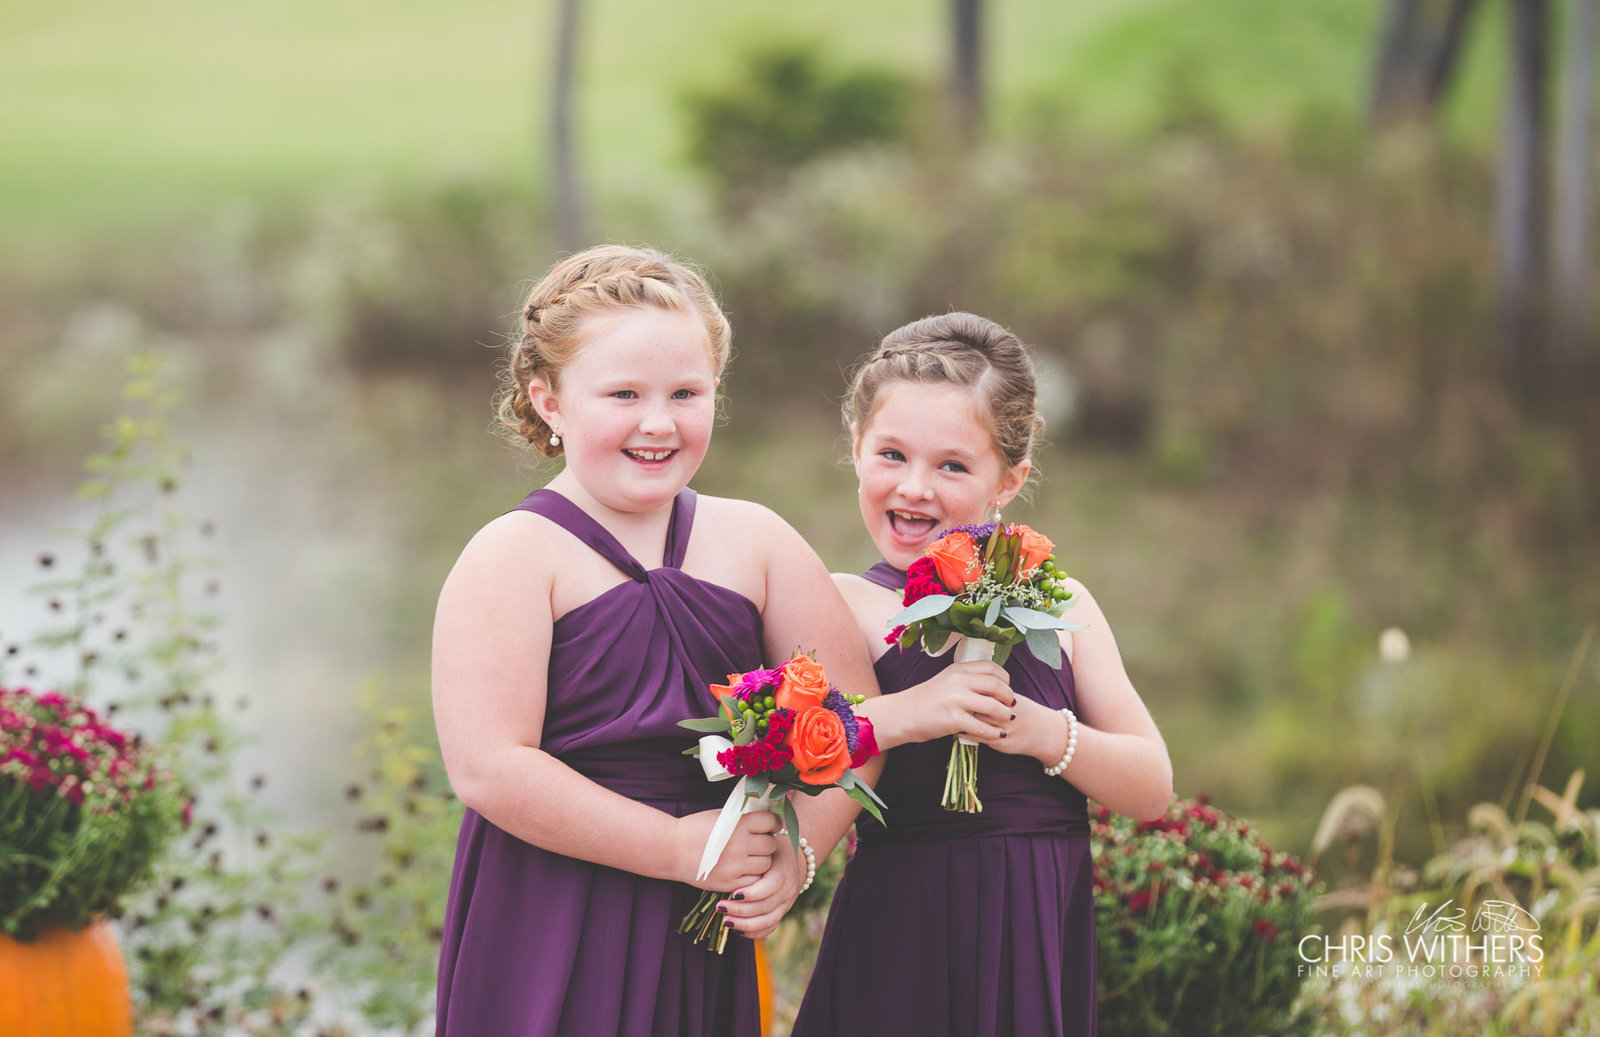 Springfield Illinois Wedding Photographer - Chris Withers Photography (59 of 159)